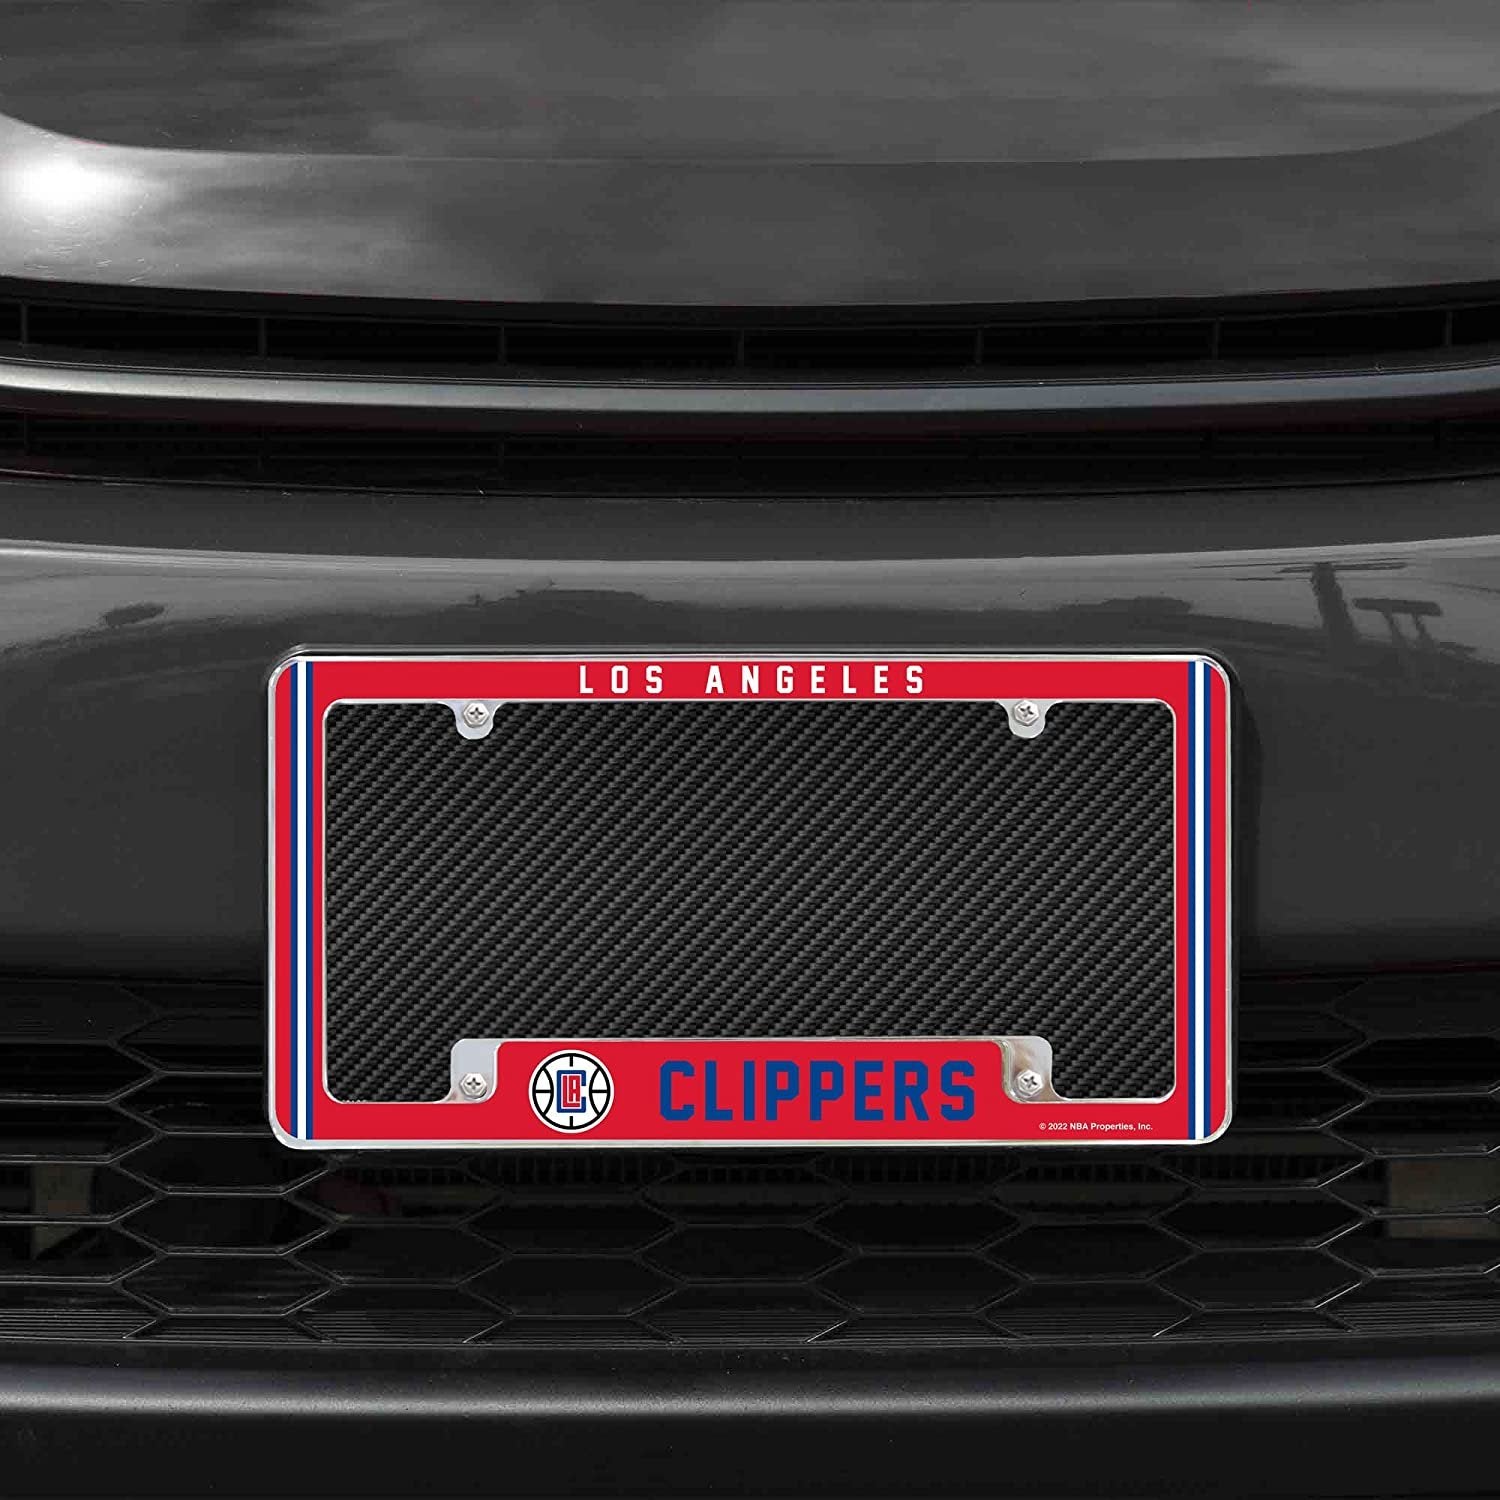 Los Angeles Clippers Metal License Plate Frame Chrome Tag Cover Alternate Design 6x12 Inch